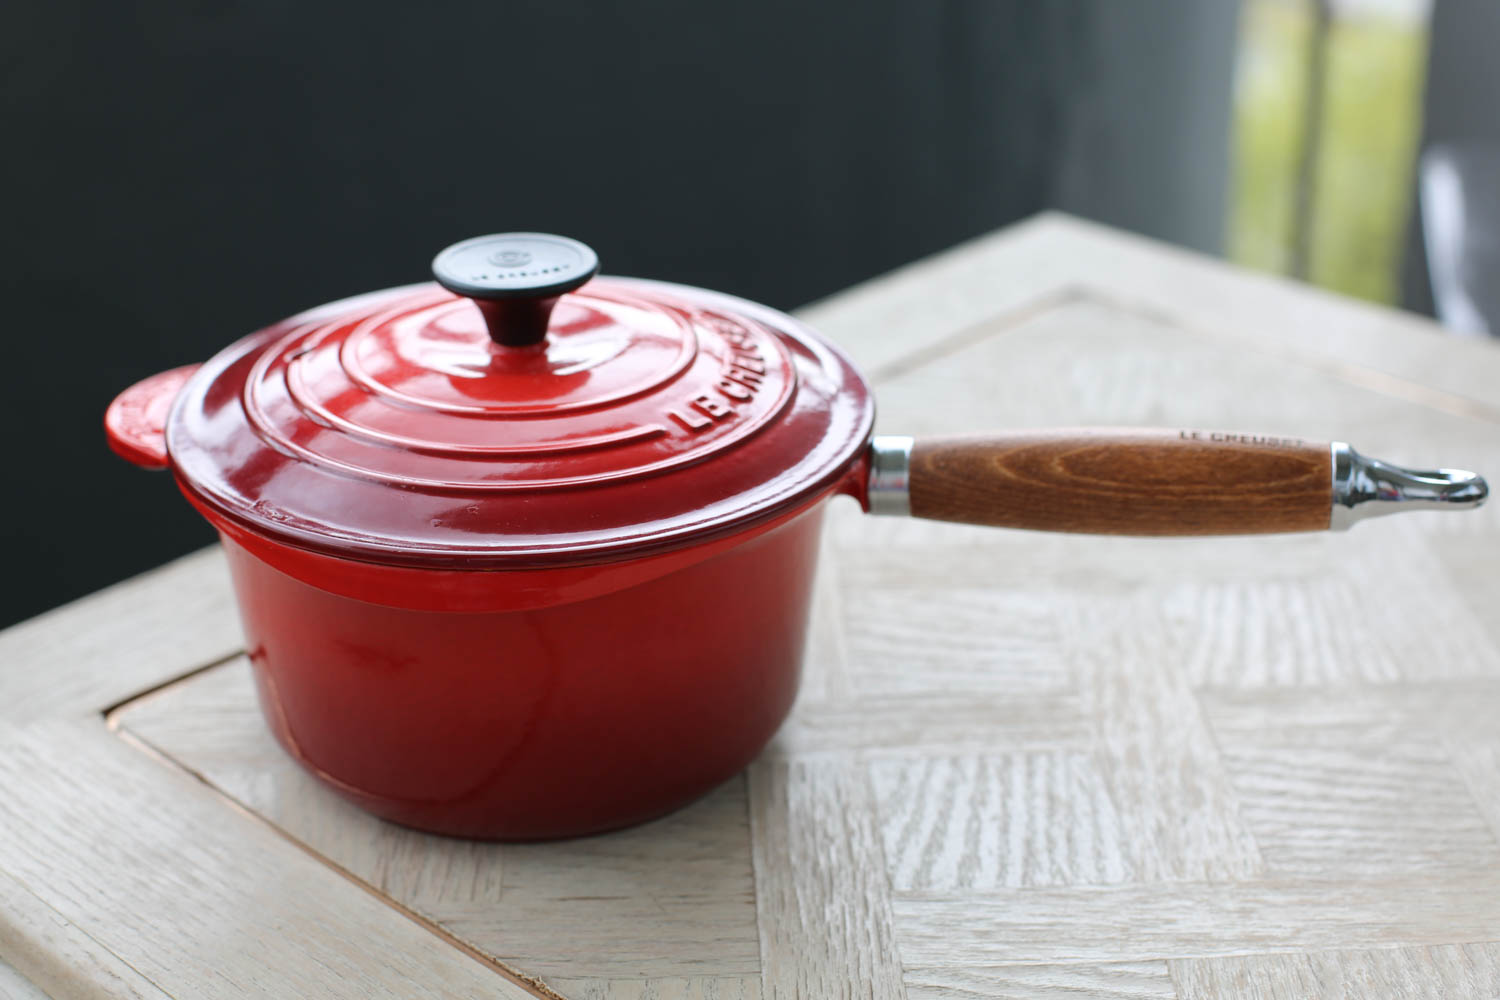 Le Creuset Heritage Wooden Handle Cast-Iron Saucepan. The wooden handle makes it comfortable to hold and keeps it cool to the touch. Perfect for stove-top cooking. I bought mine at Williams-Sonoma. 